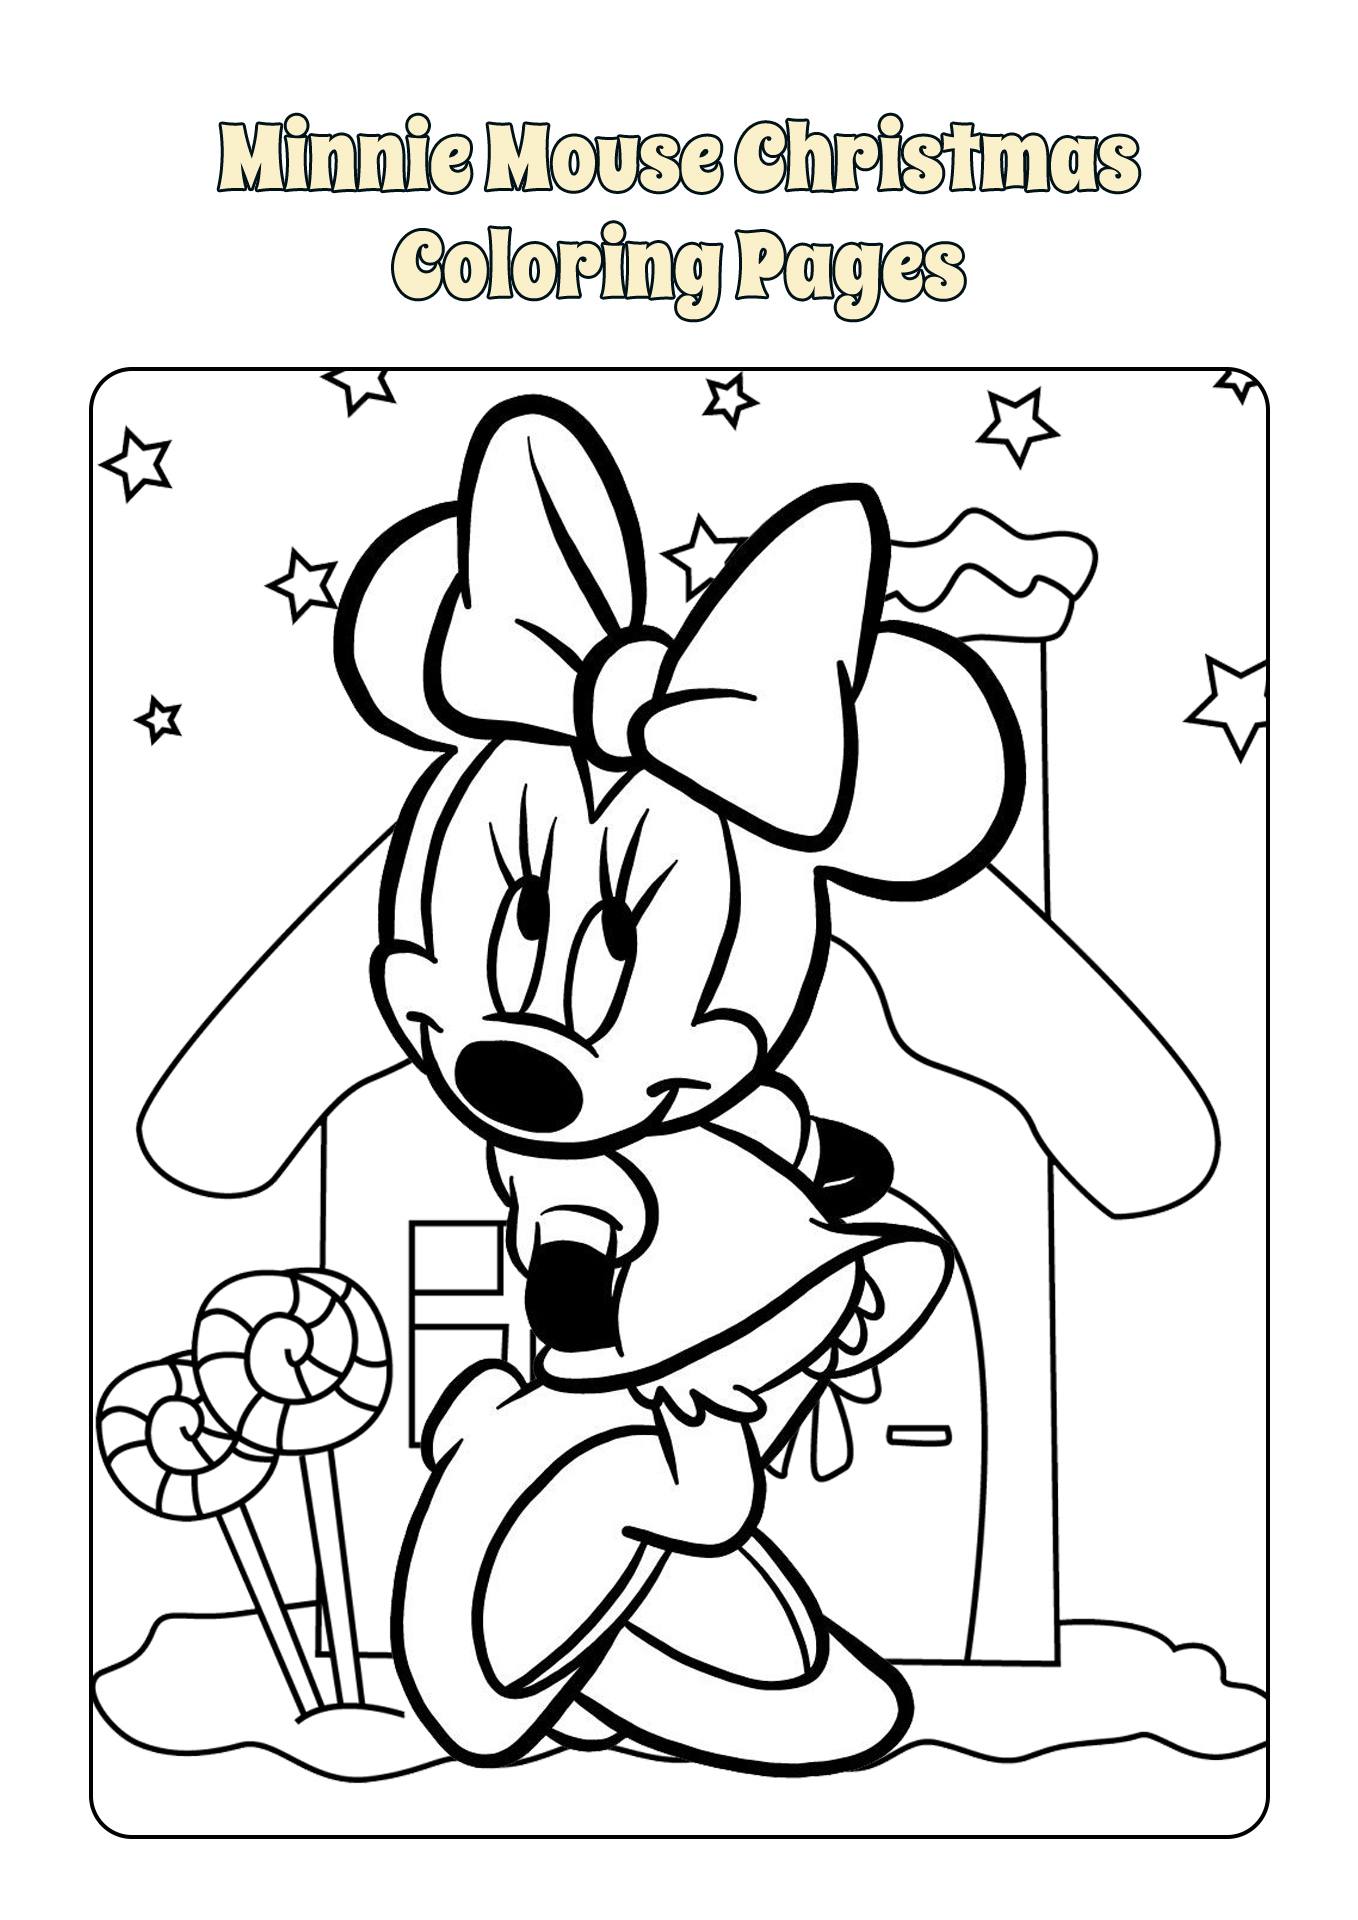 Minnie Mouse Christmas Coloring Pages Image